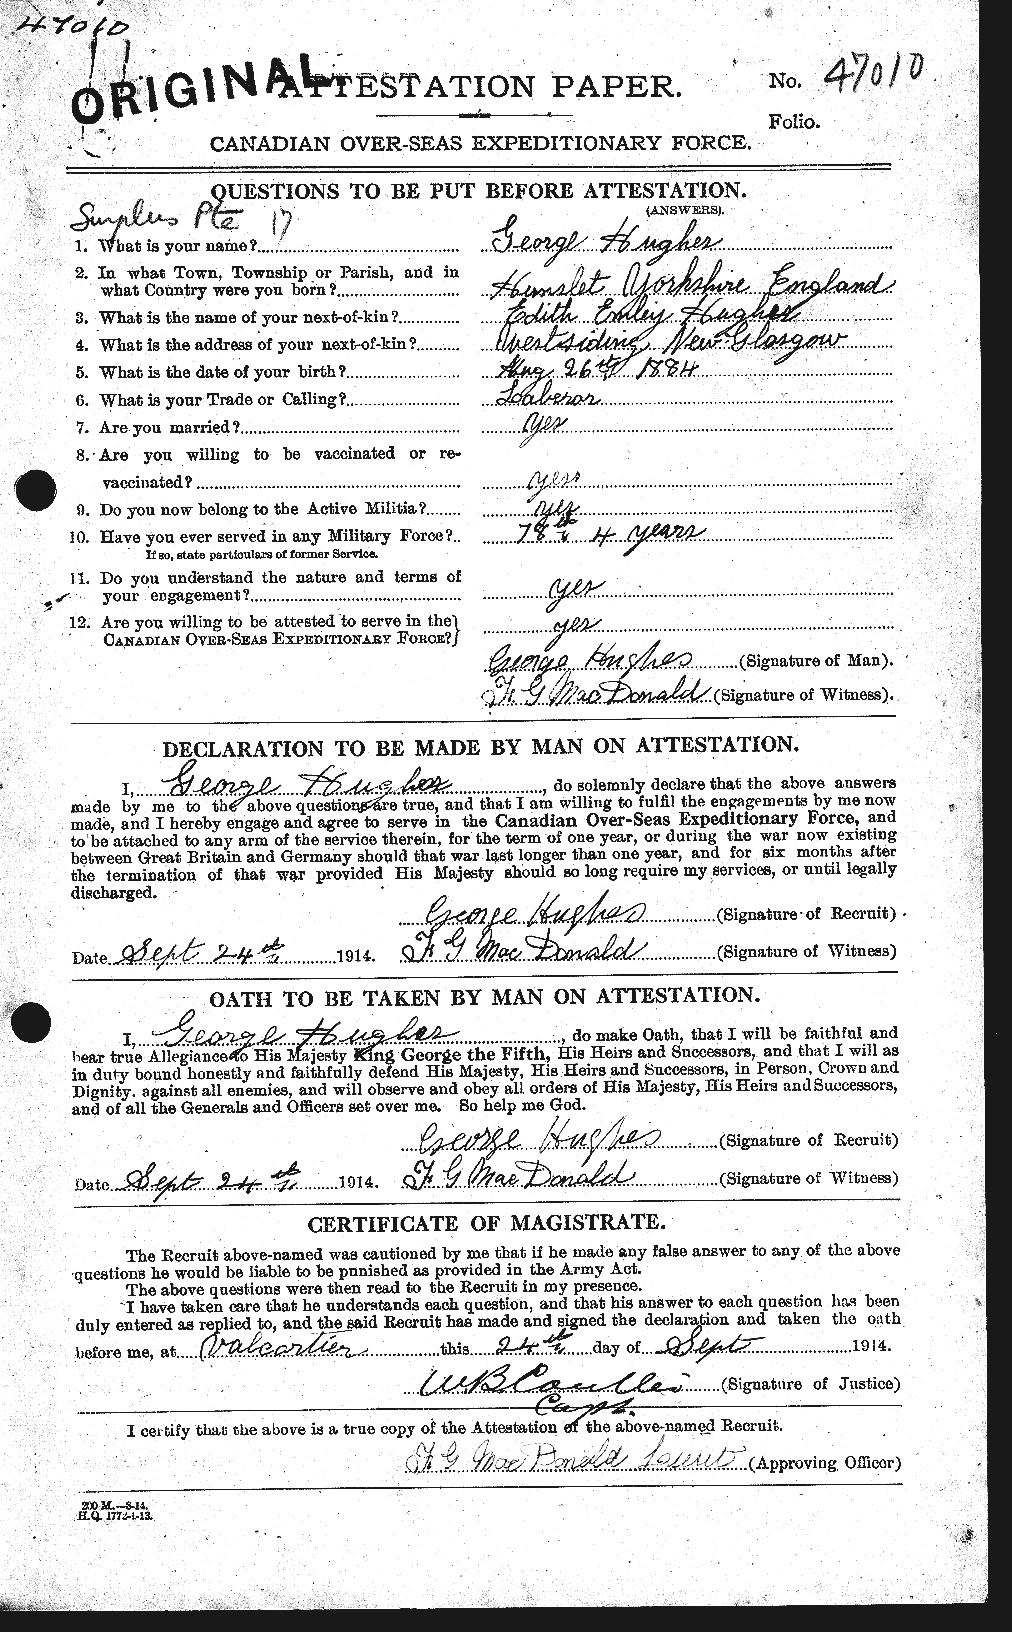 Personnel Records of the First World War - CEF 403819a